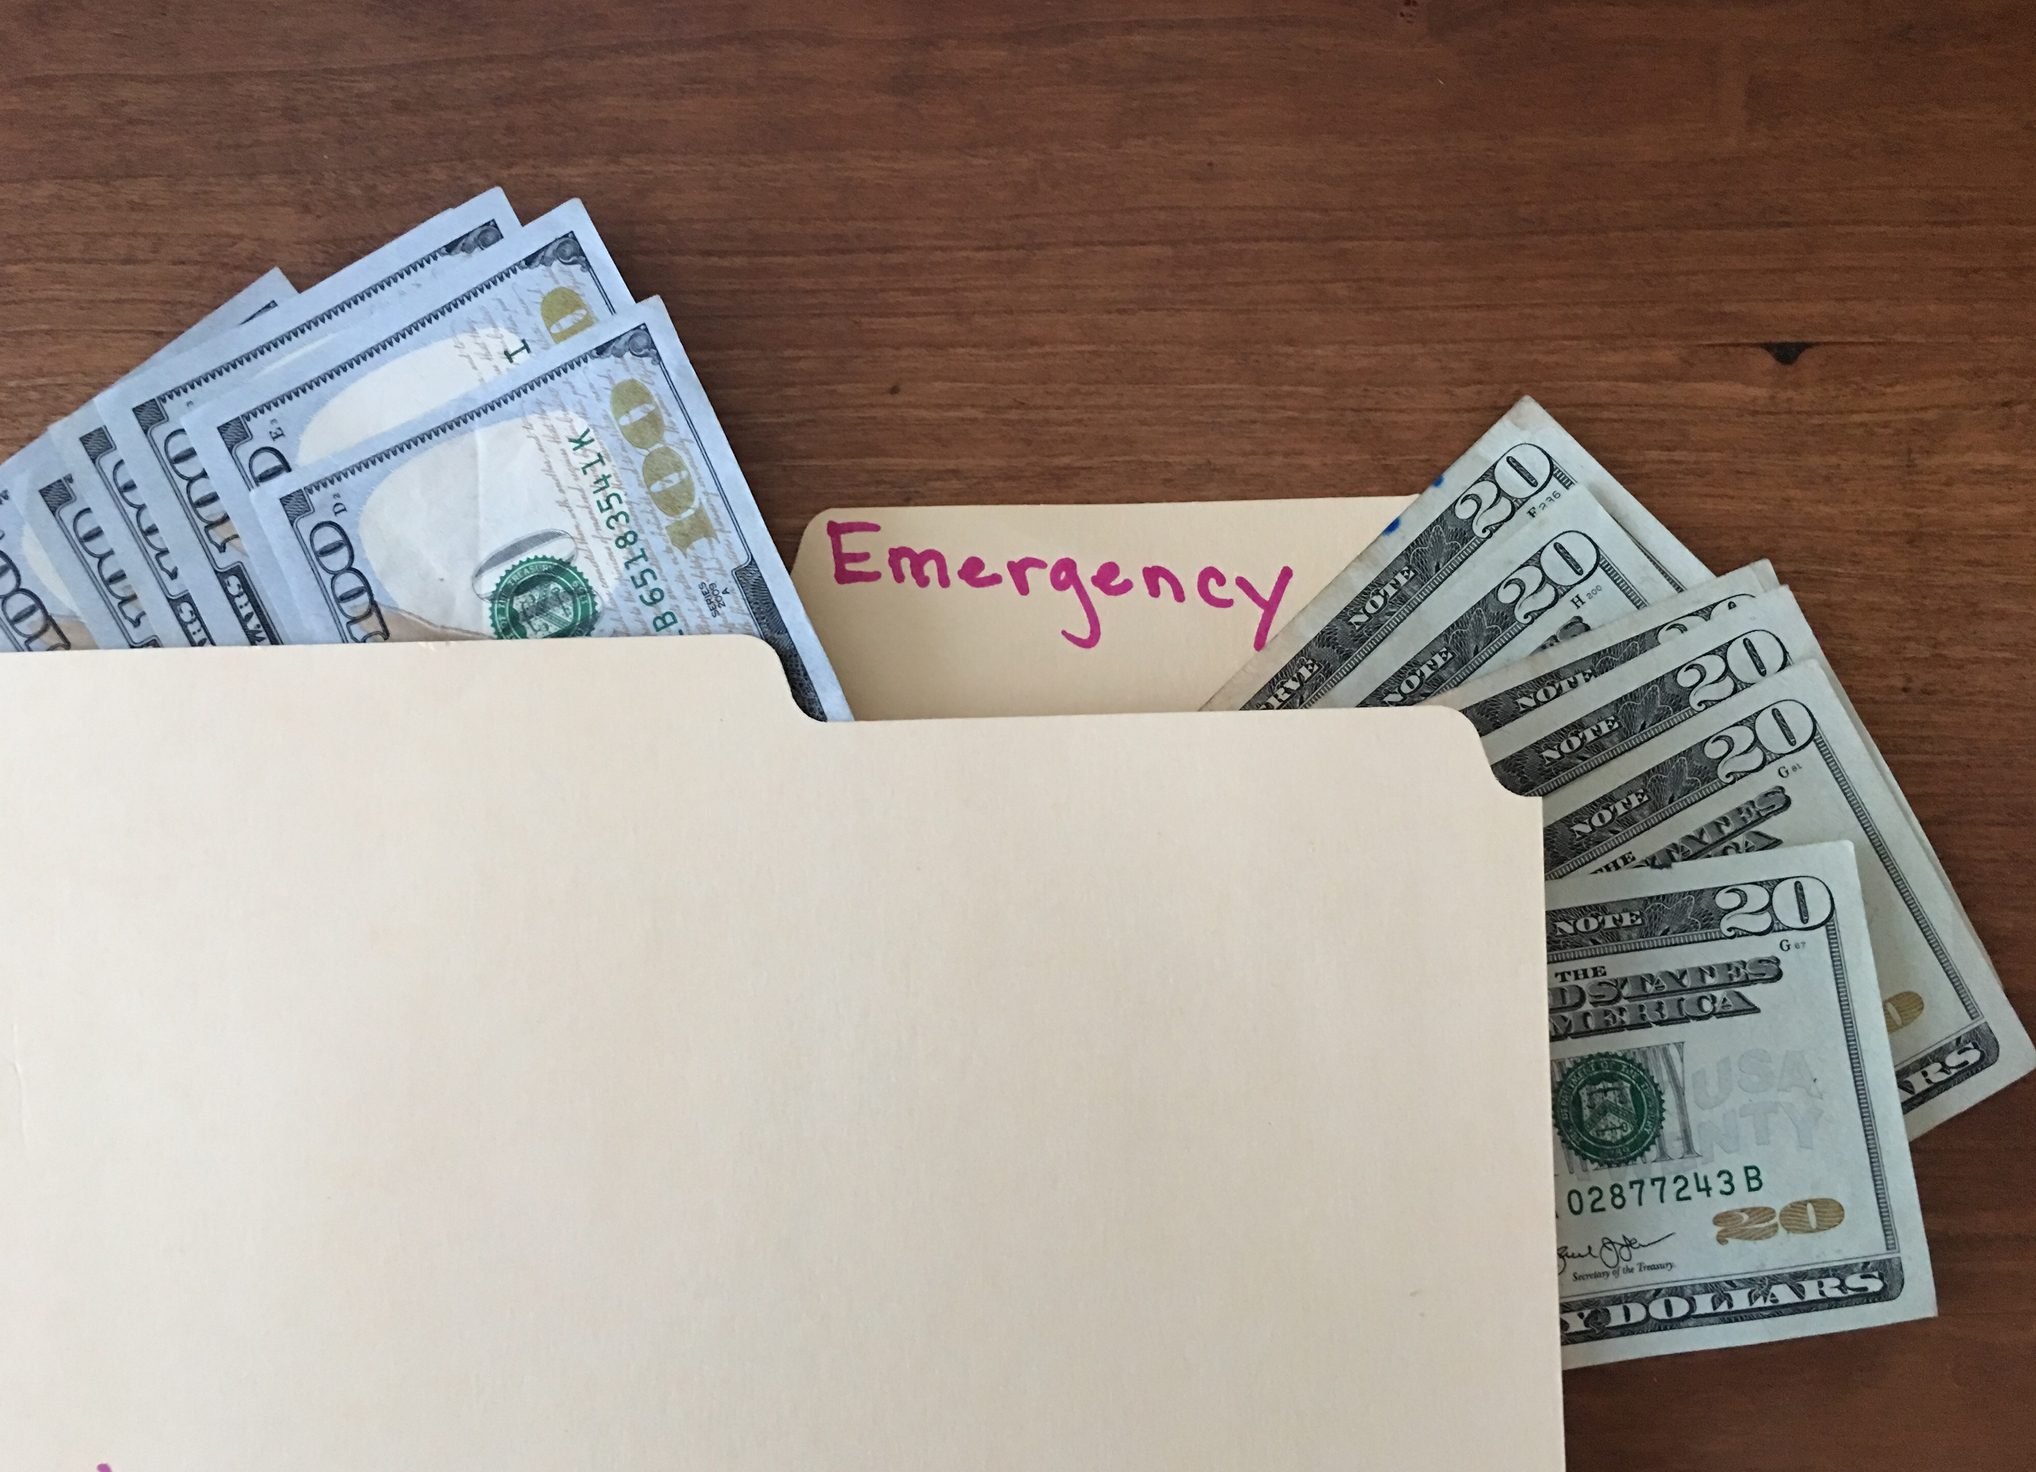 13 Crucial Things You Should Always Have in Your Home Emergency Kit